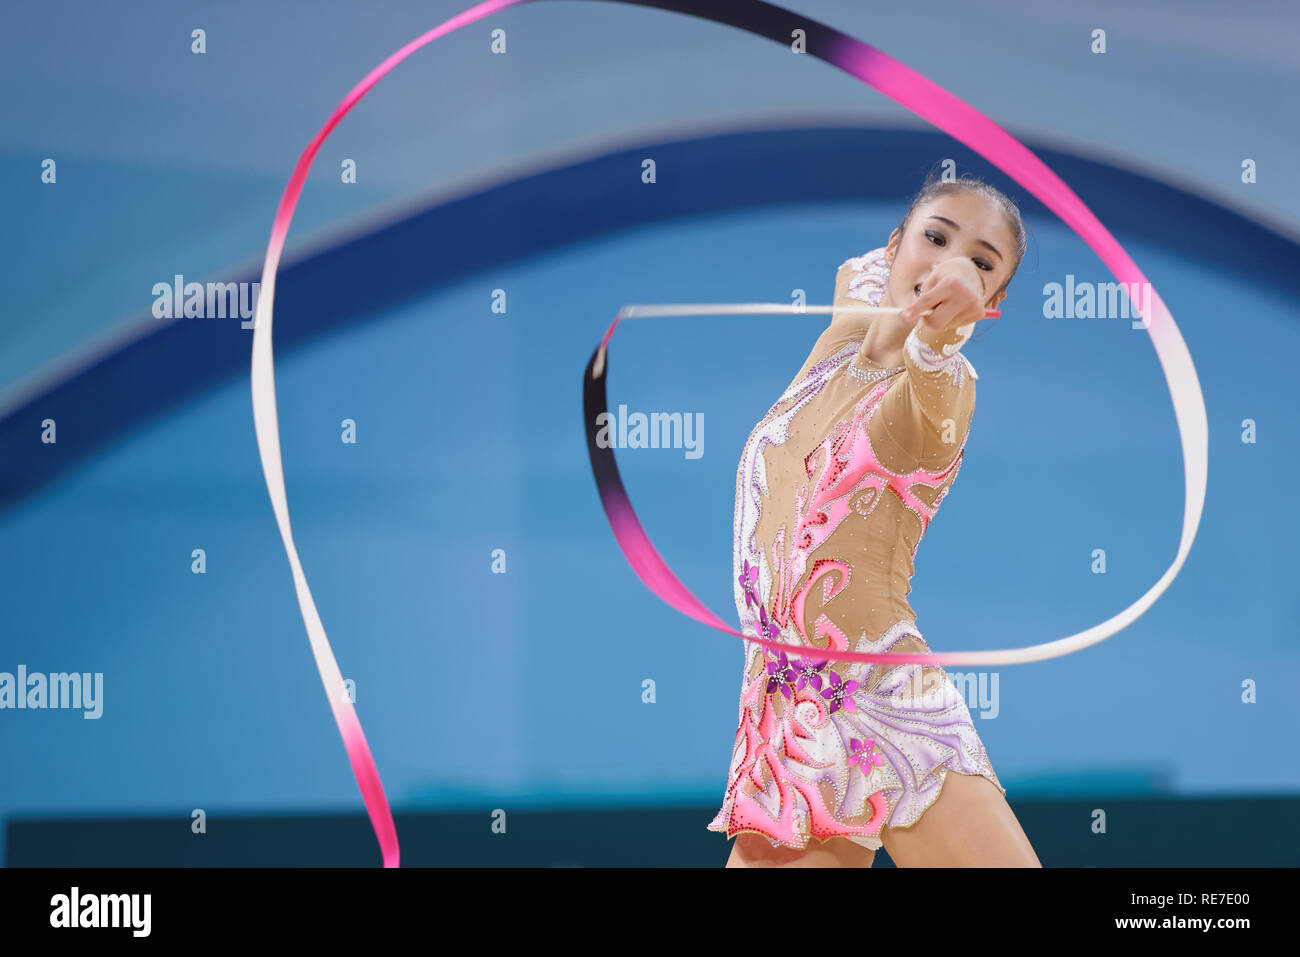 Kiev, Ukraine - August 29, 2013: Yeon Jae Son, Korea performs with ribbon during 32nd Rhythmic Gymnastics World Championships. The event is held in Pa Stock Photo